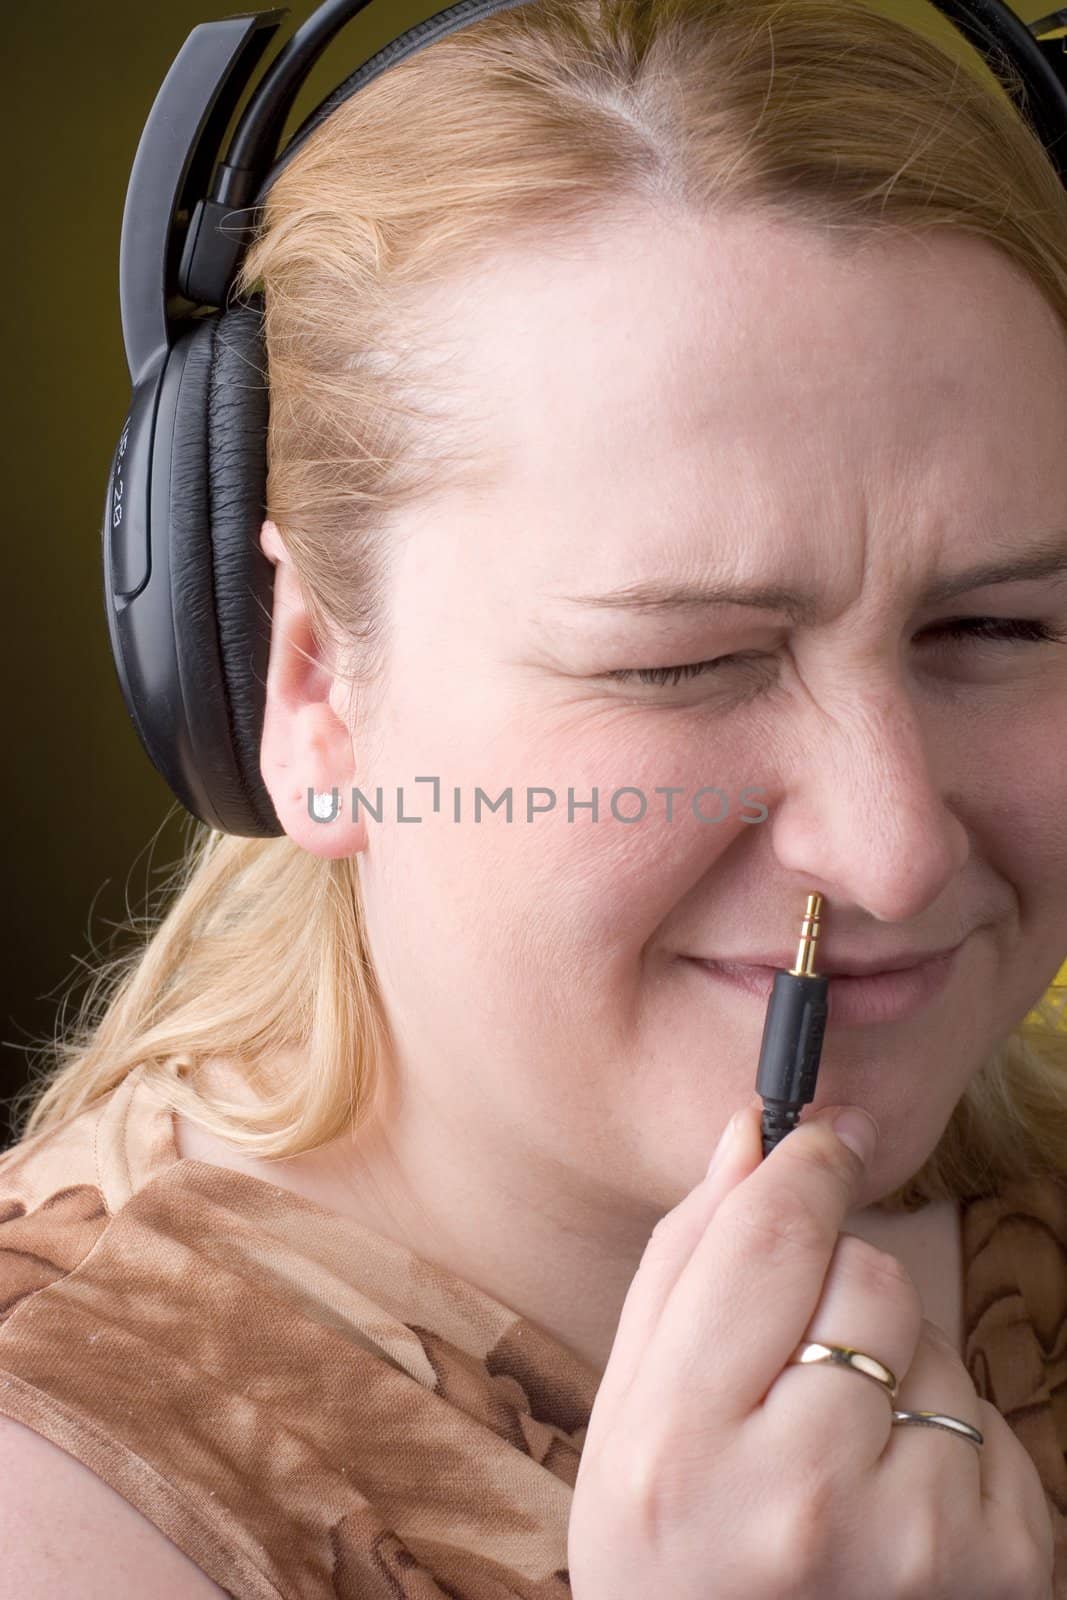 Women trying to plugin headset in her nose with any success